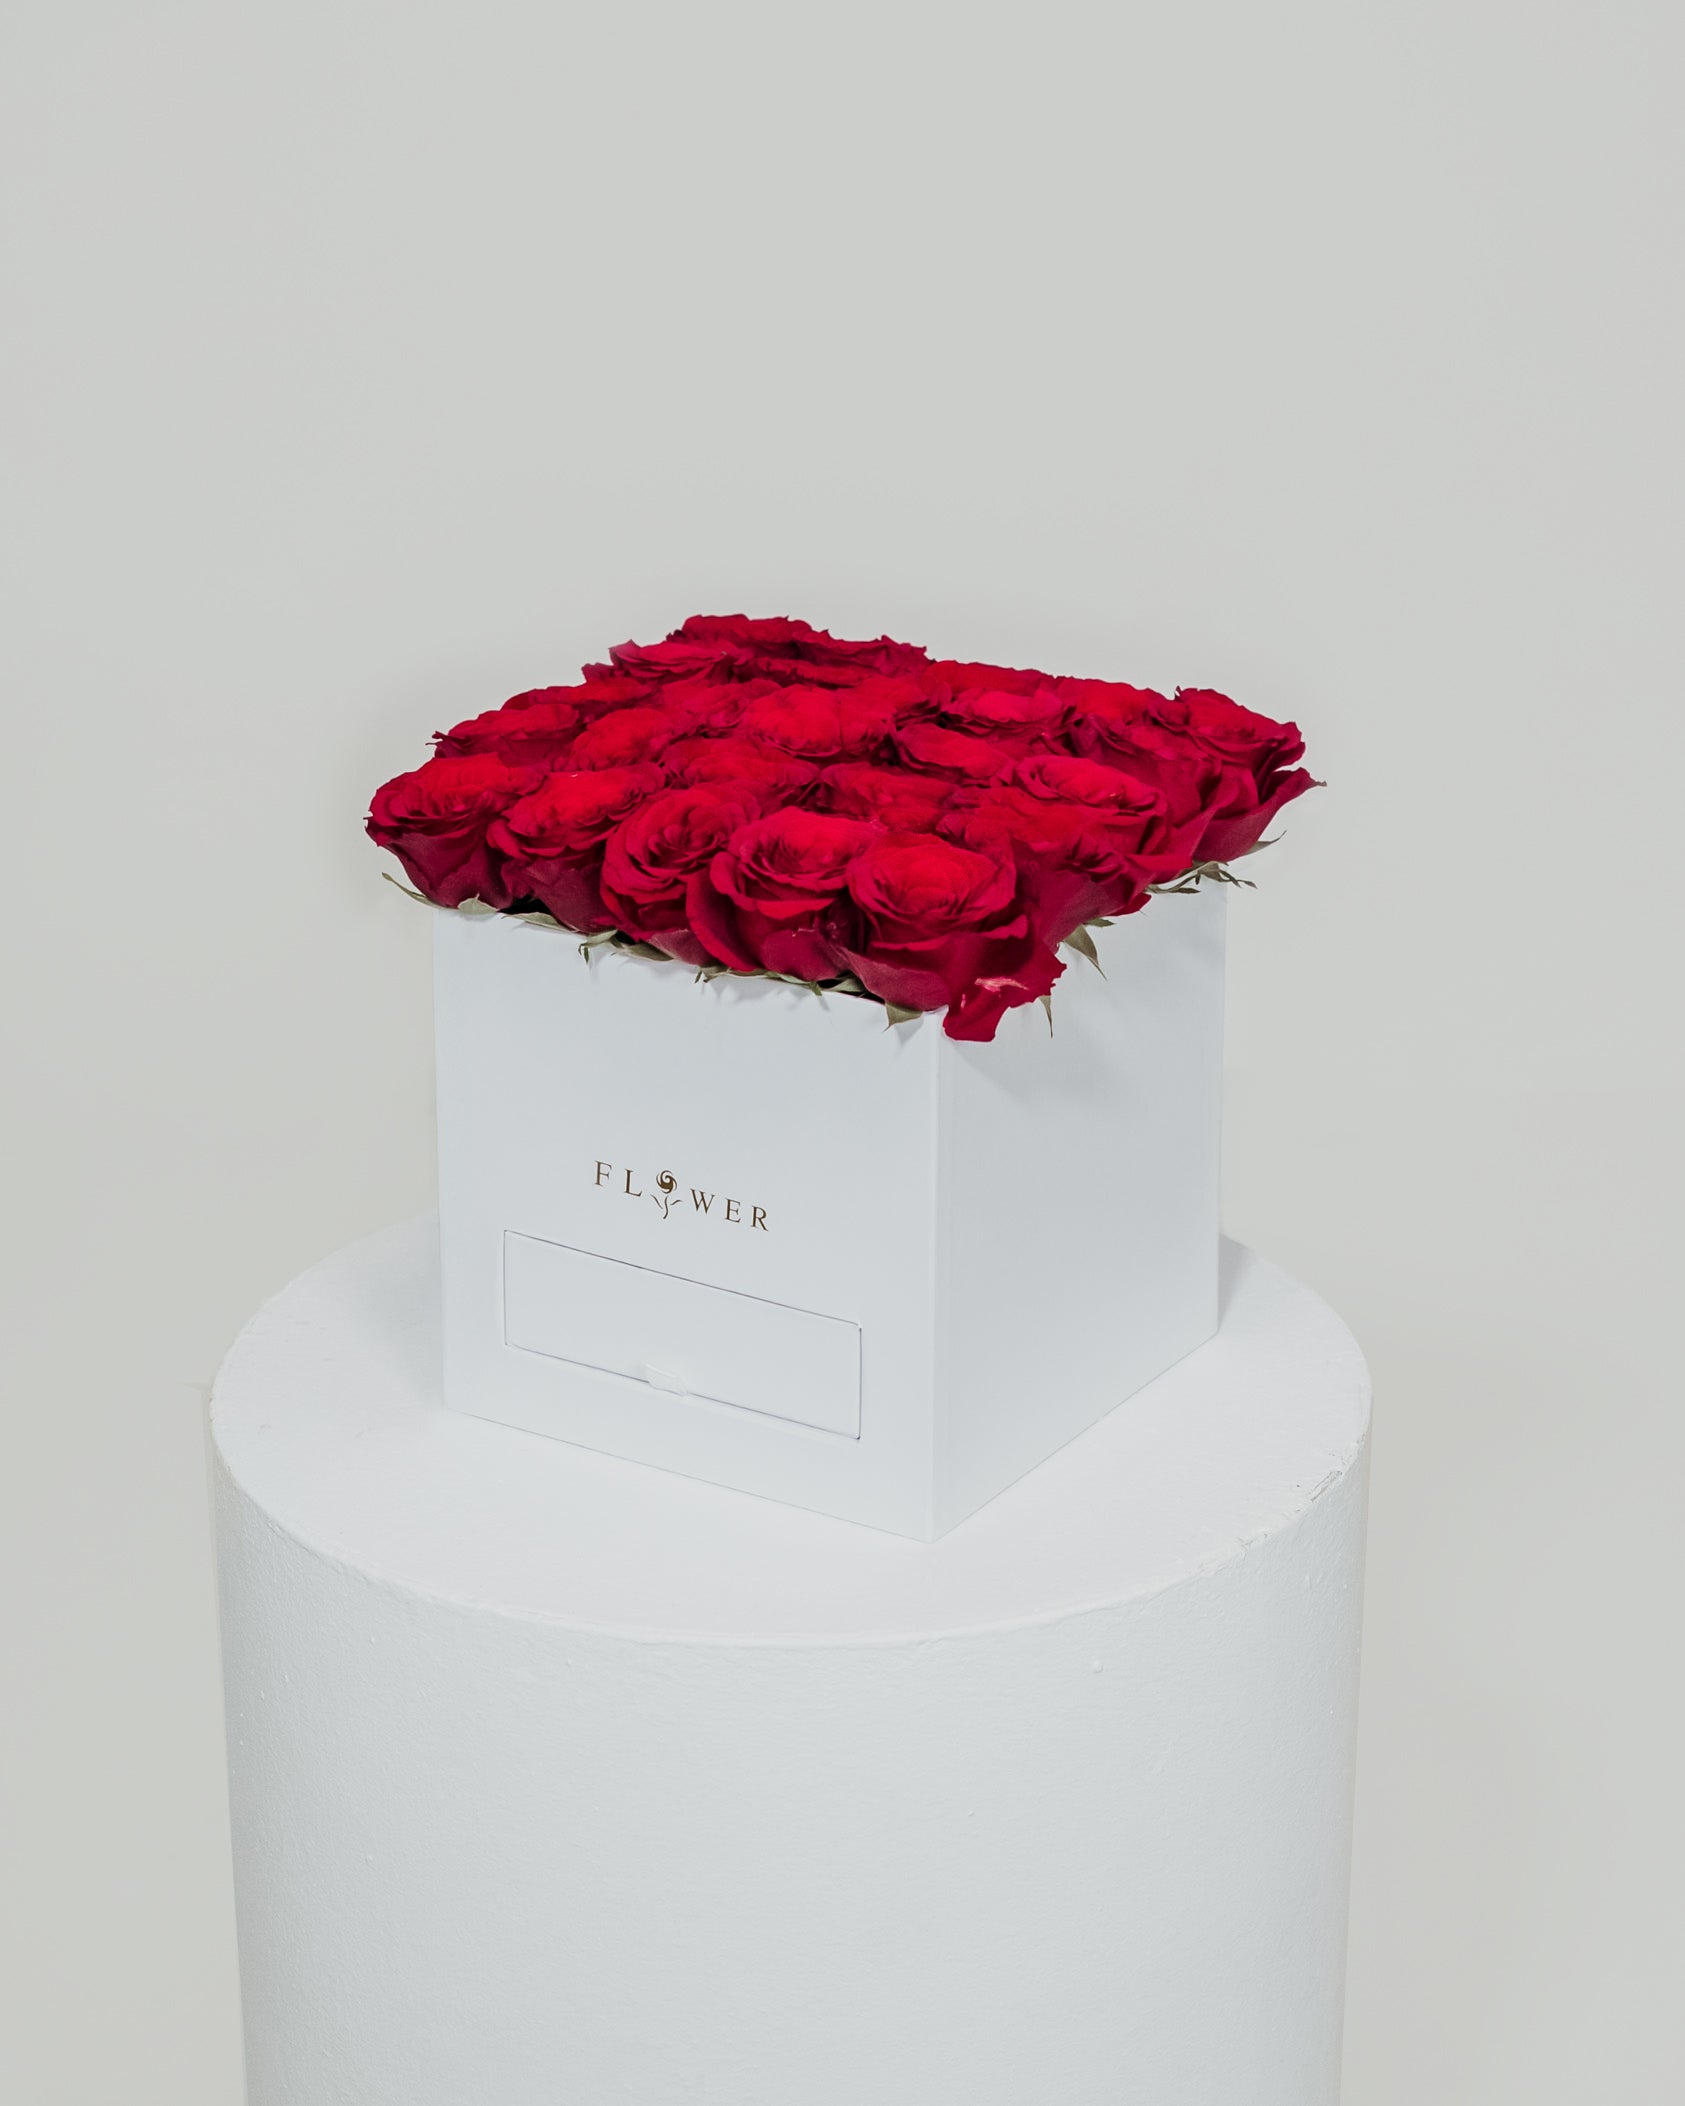 A white box filled with beautiful red roses, complemented by a drawer filled with Ferrero Rocher chocolates.